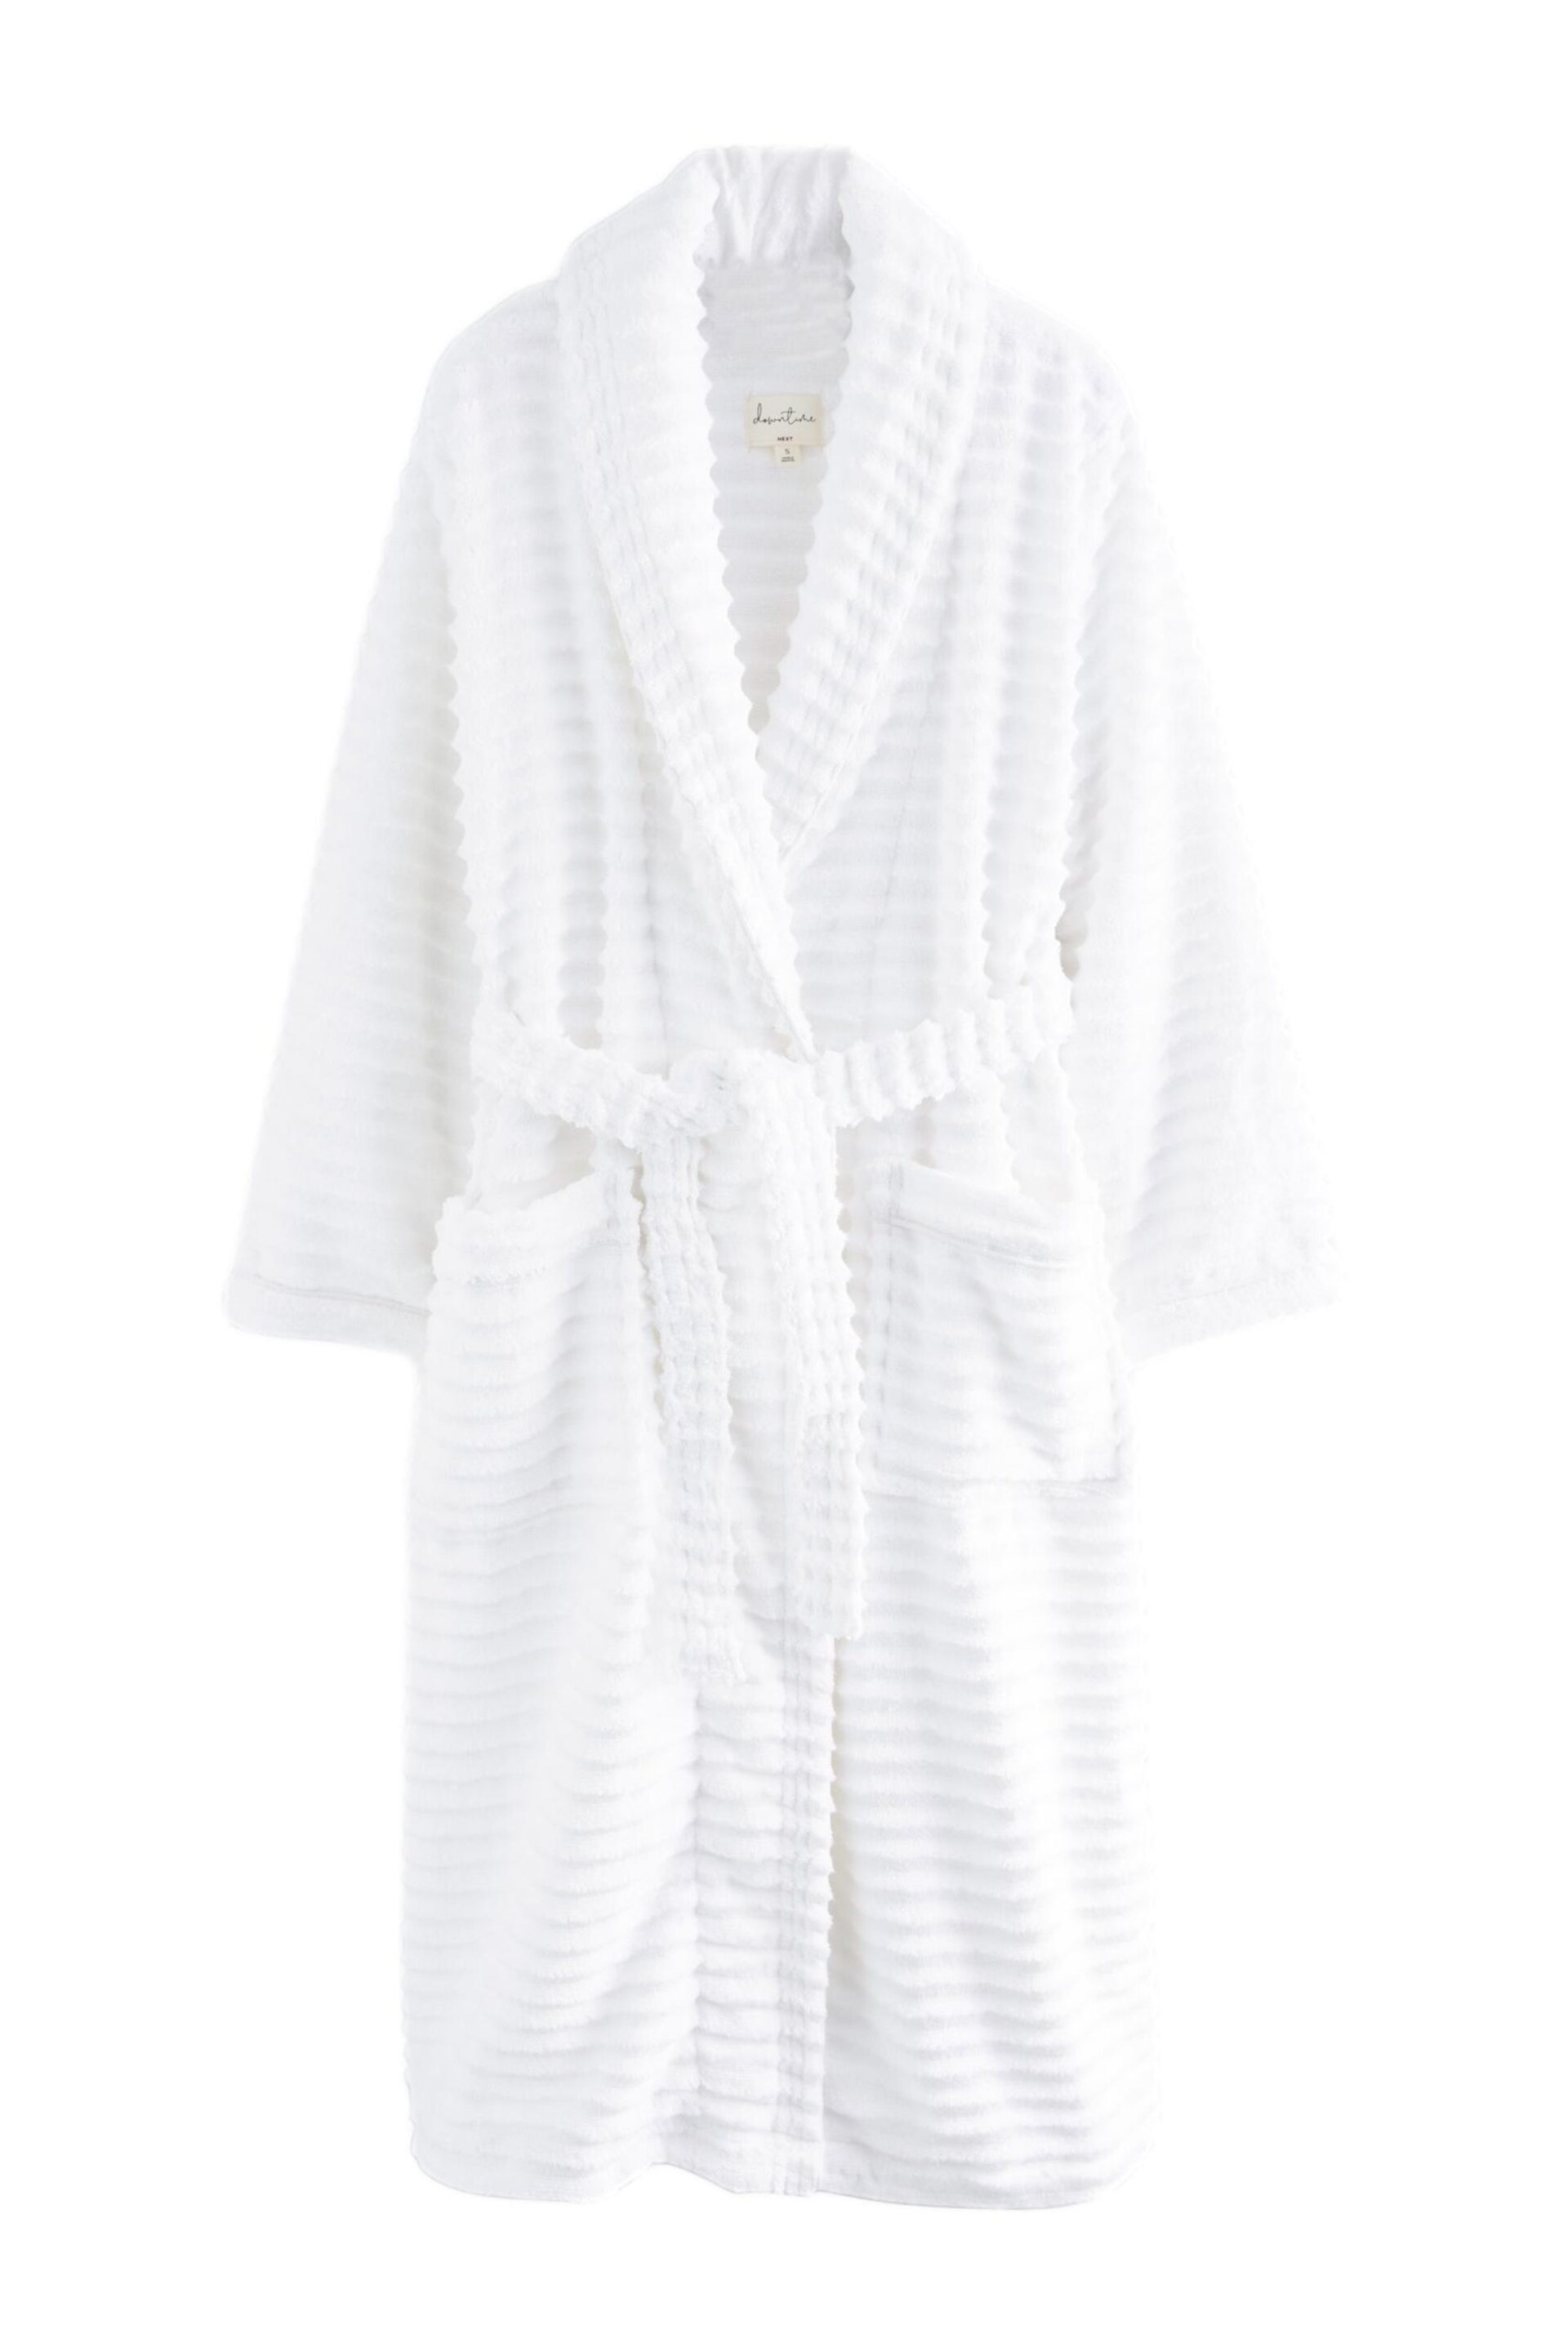 White Towelling Dressing Gown - Image 3 of 4